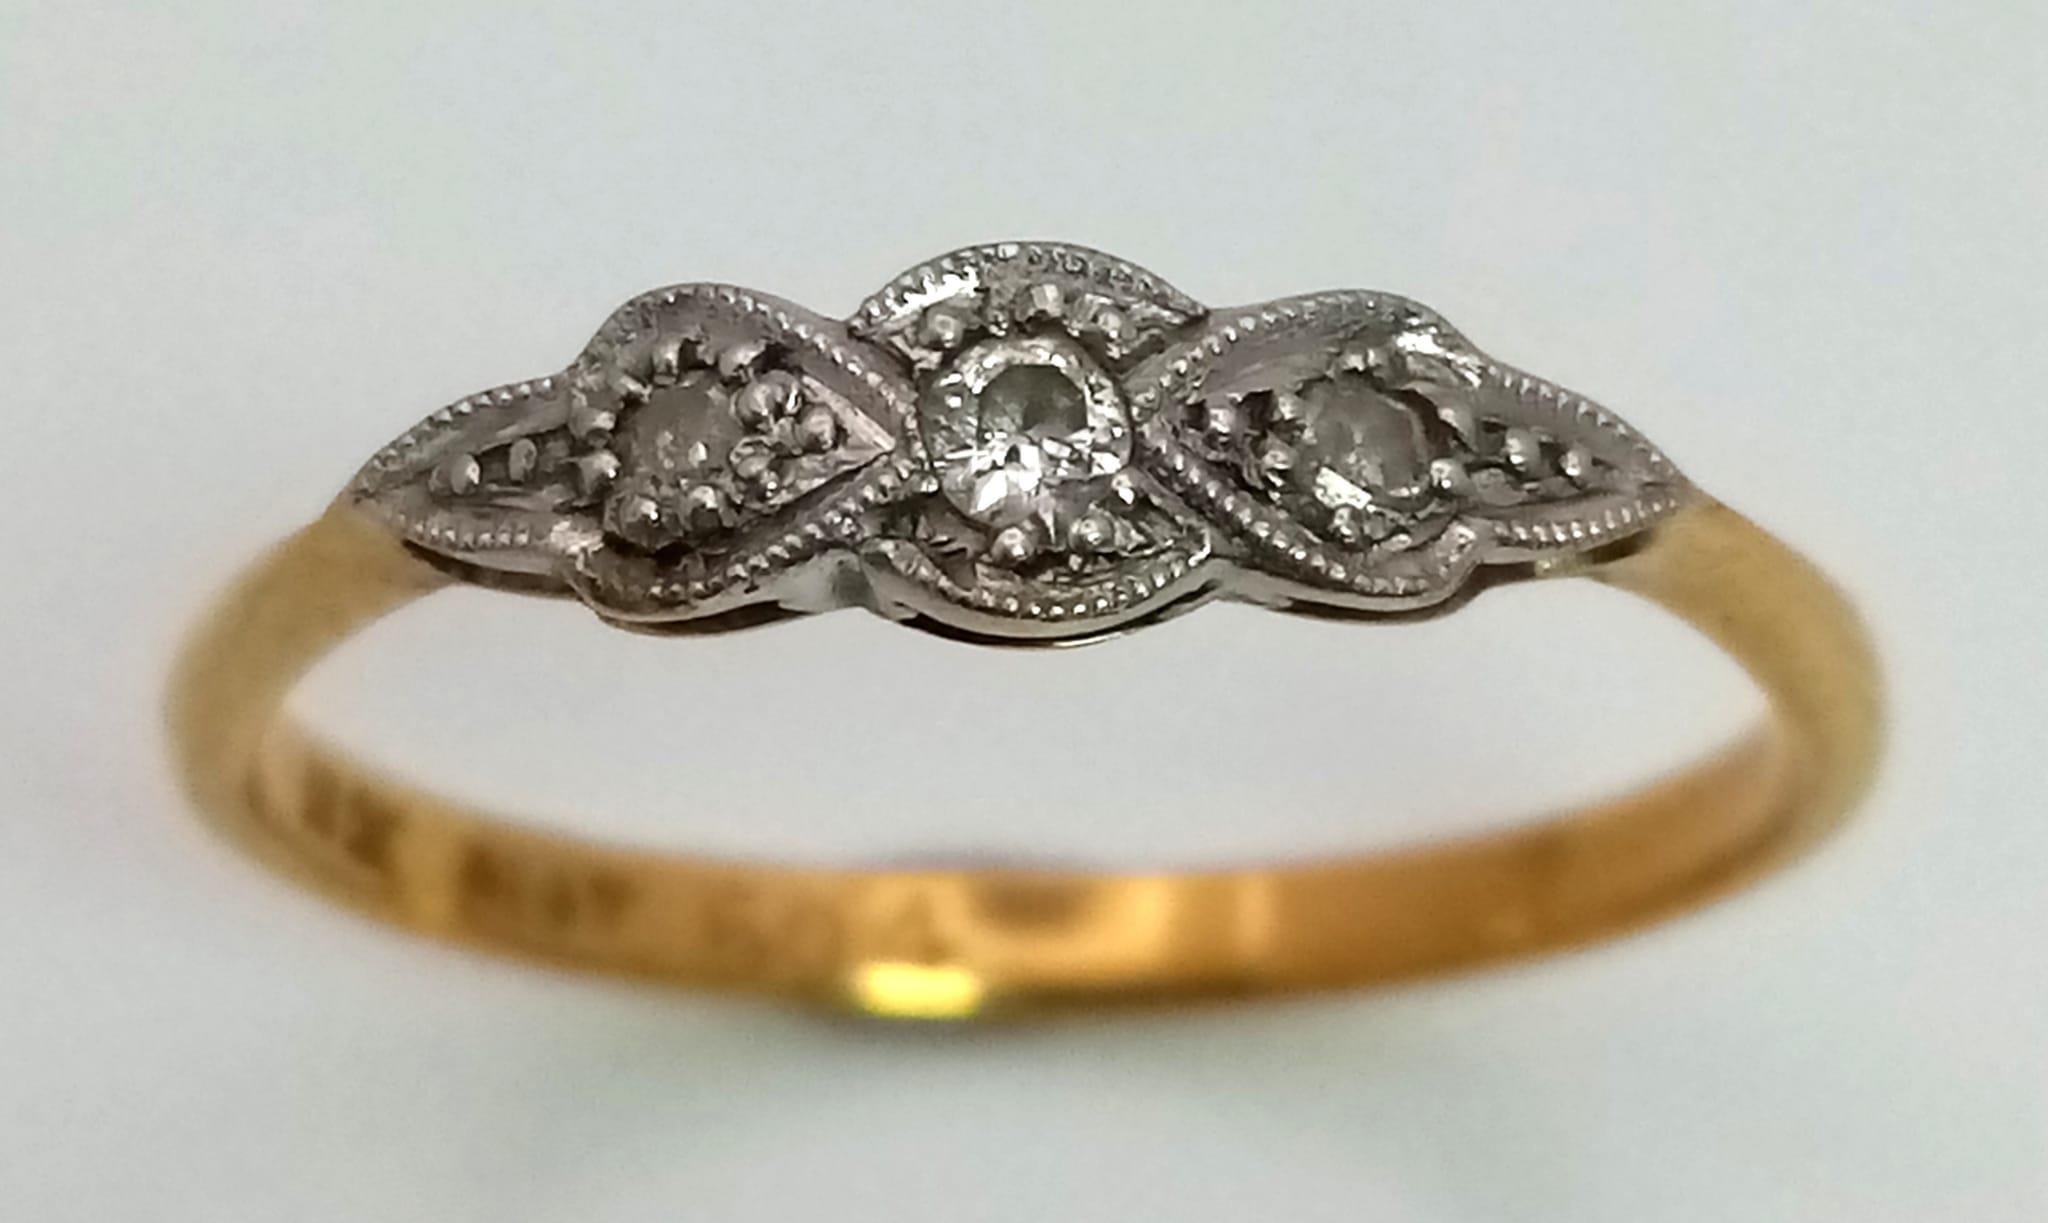 An 18 K yellow gold and platinum ring with a trilogy of diamonds. Ring size: N, weight: 1.7 g. - Image 3 of 7